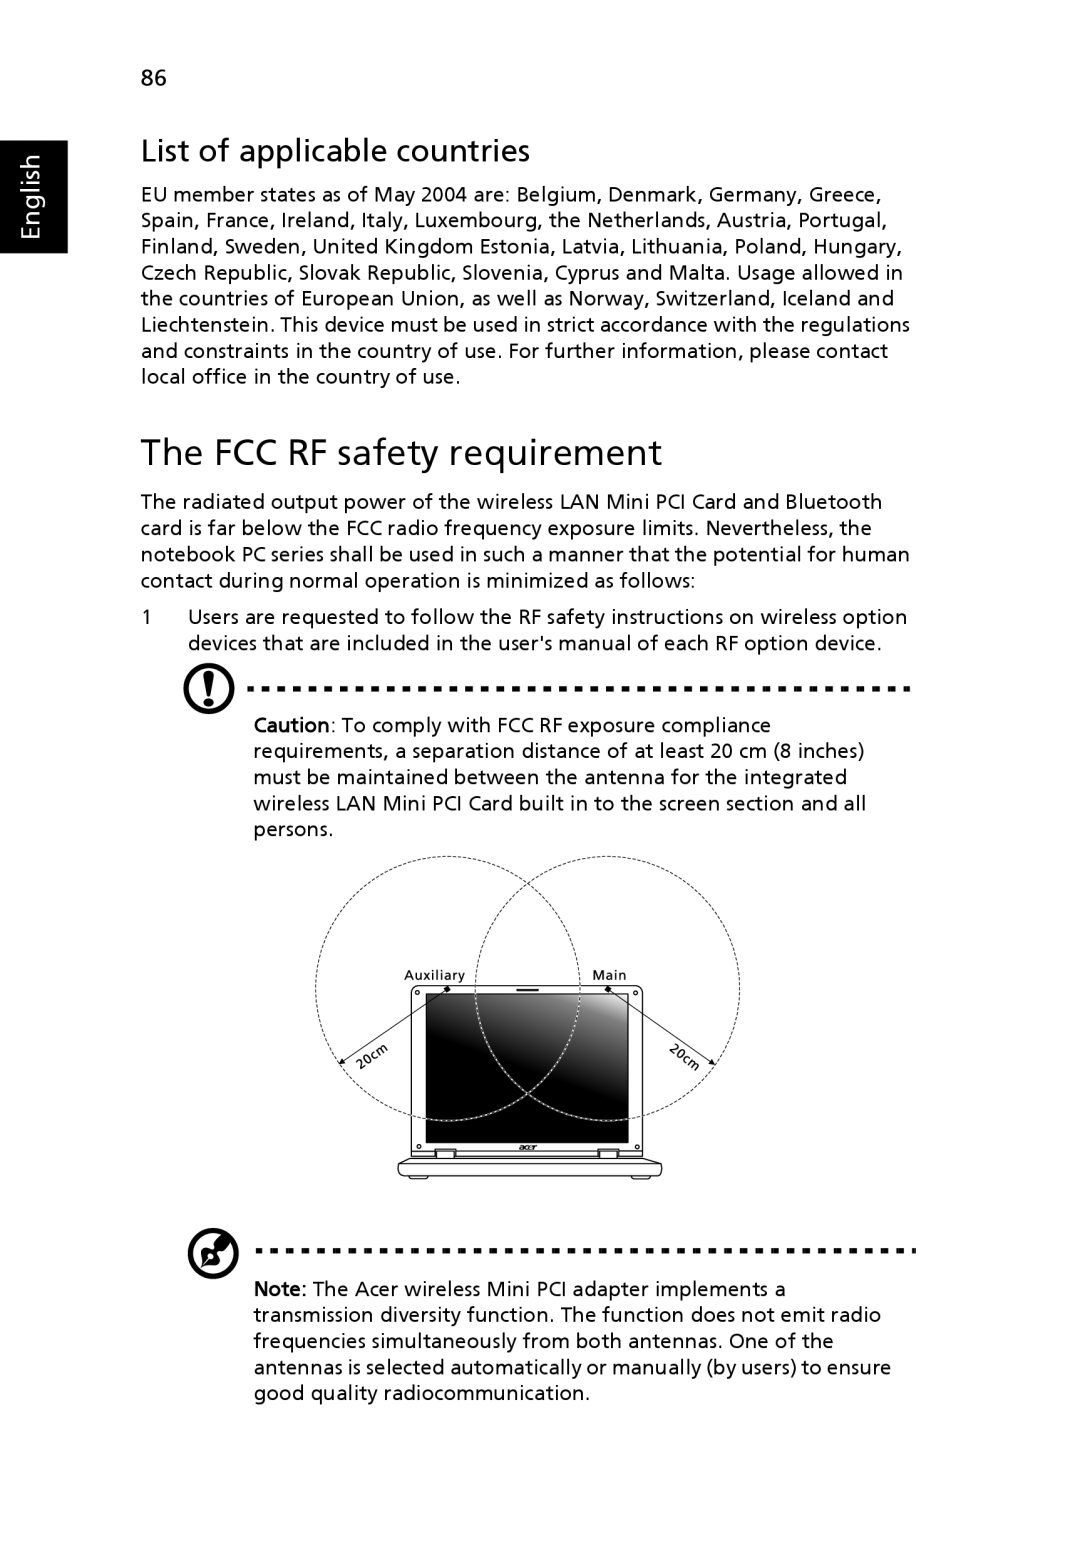 Acer 4920, MS2219 manual The FCC RF safety requirement, List of applicable countries, English 